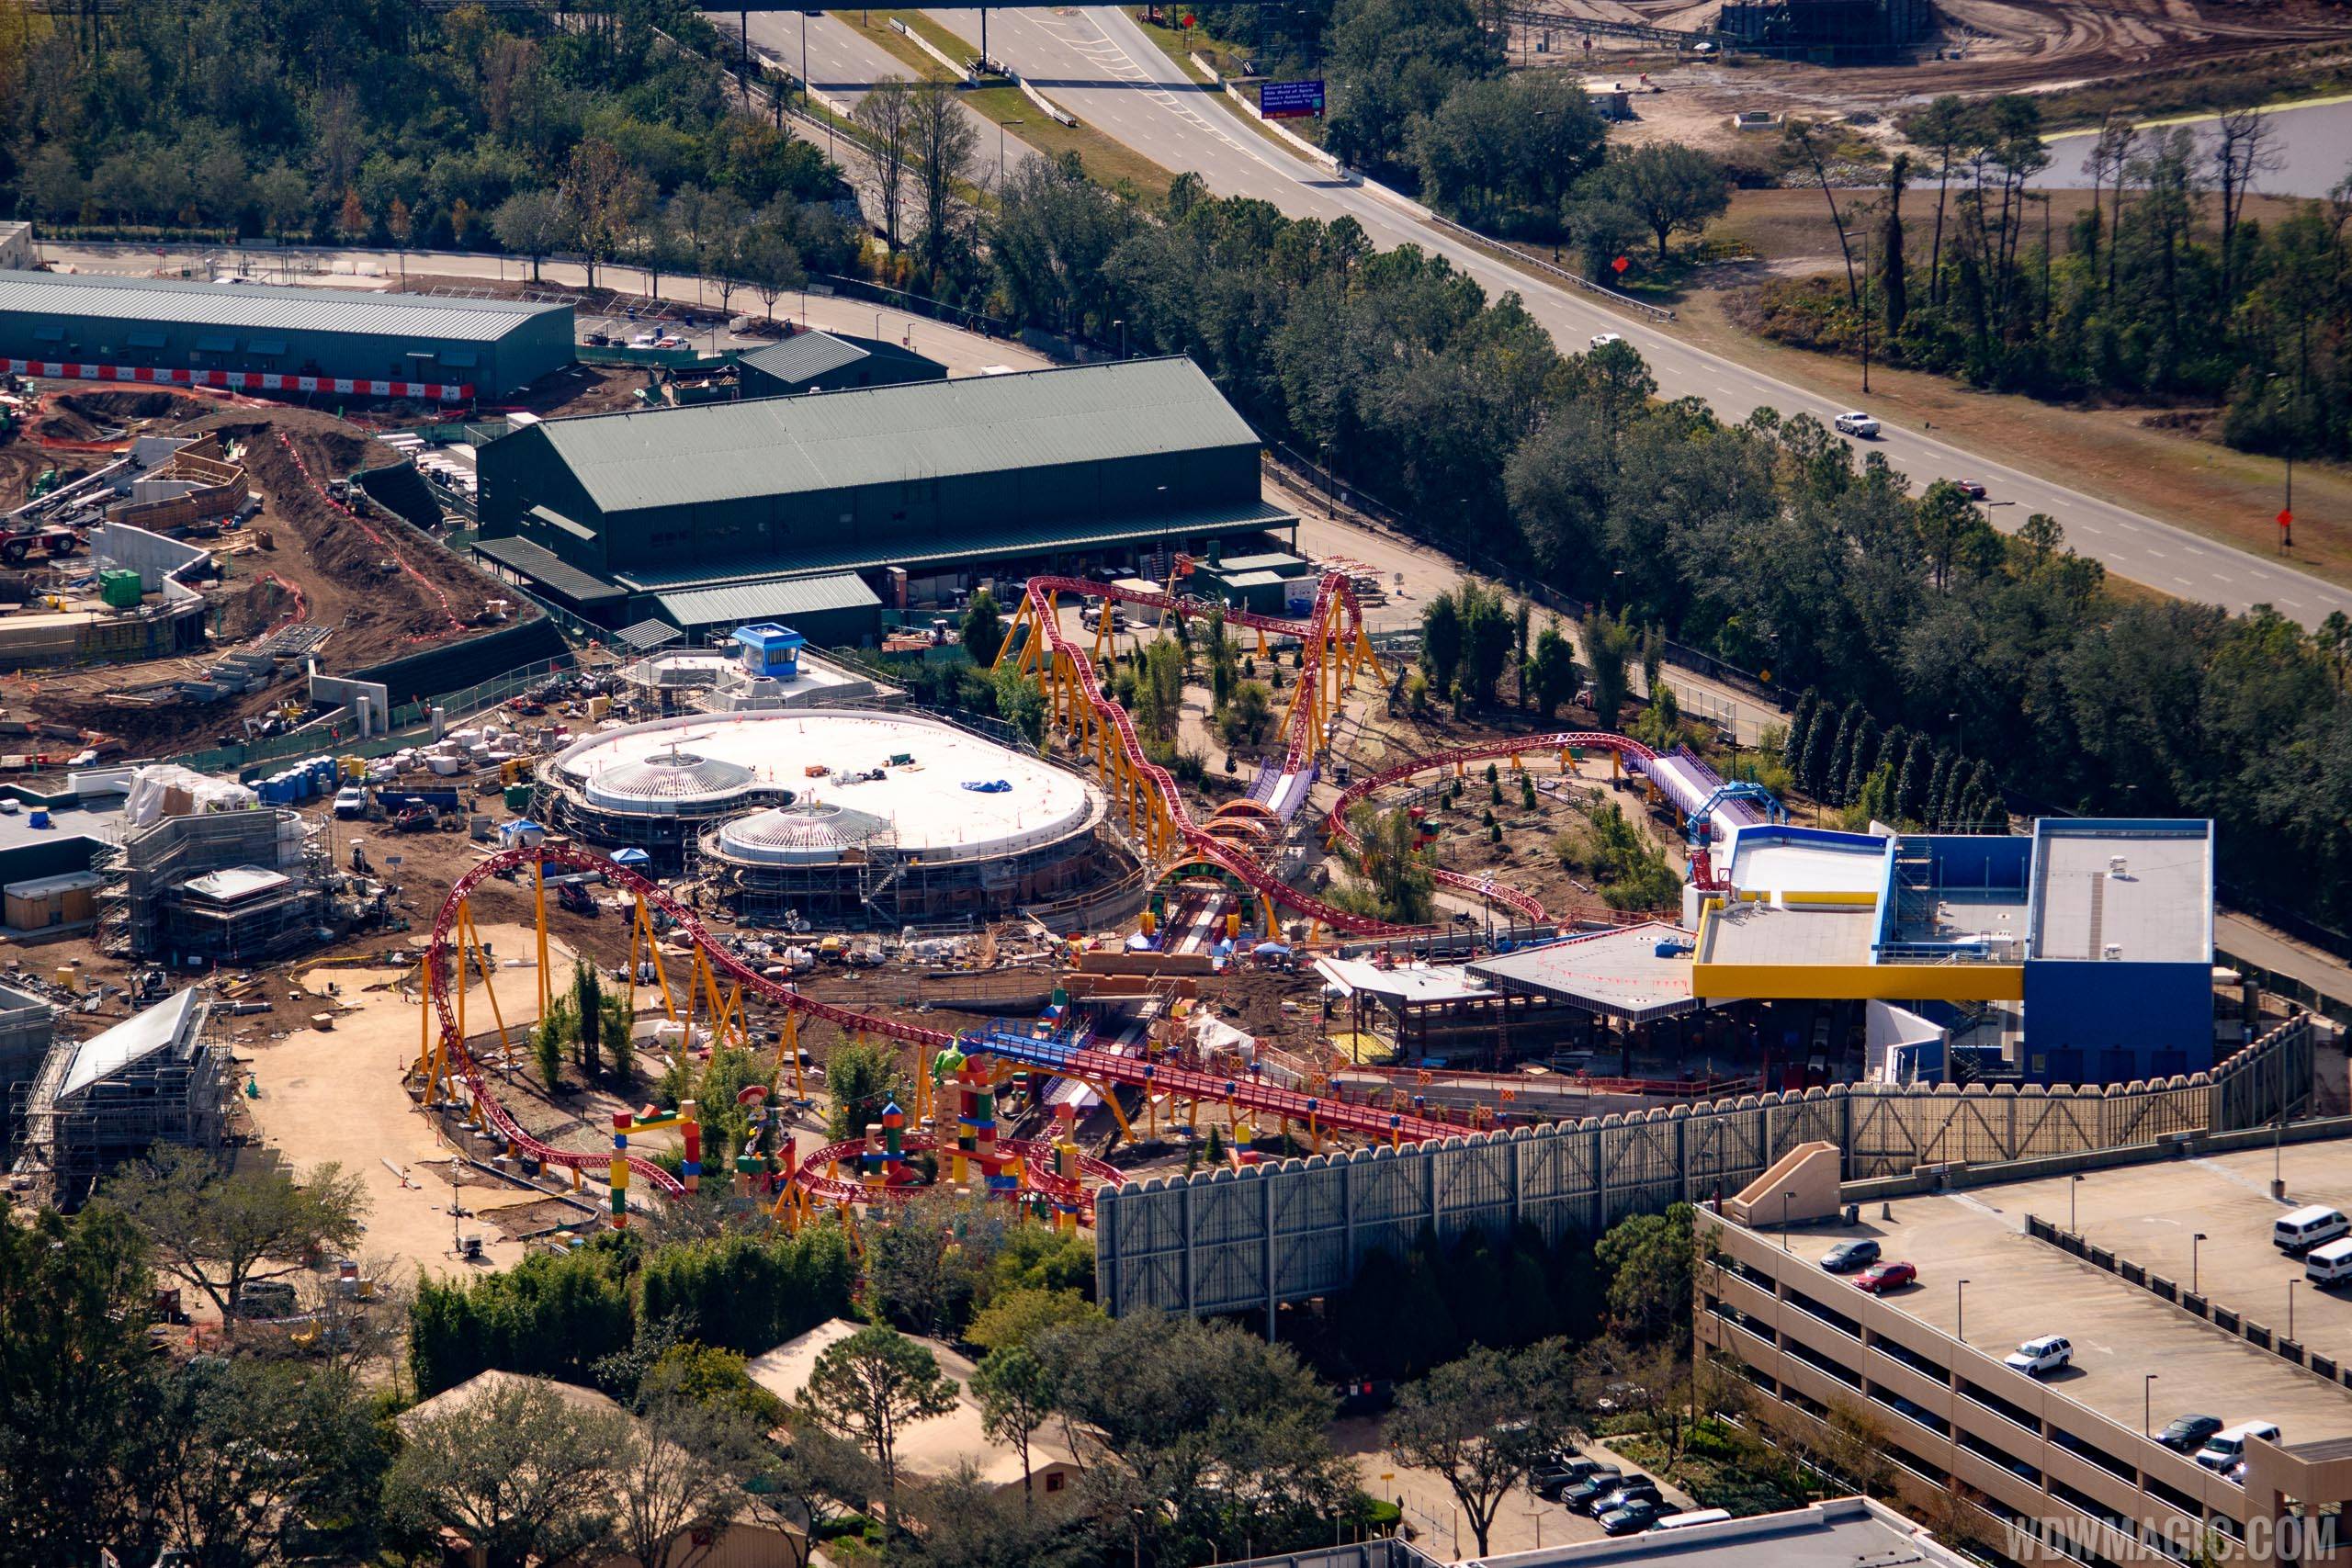 Toy Story Land wide view